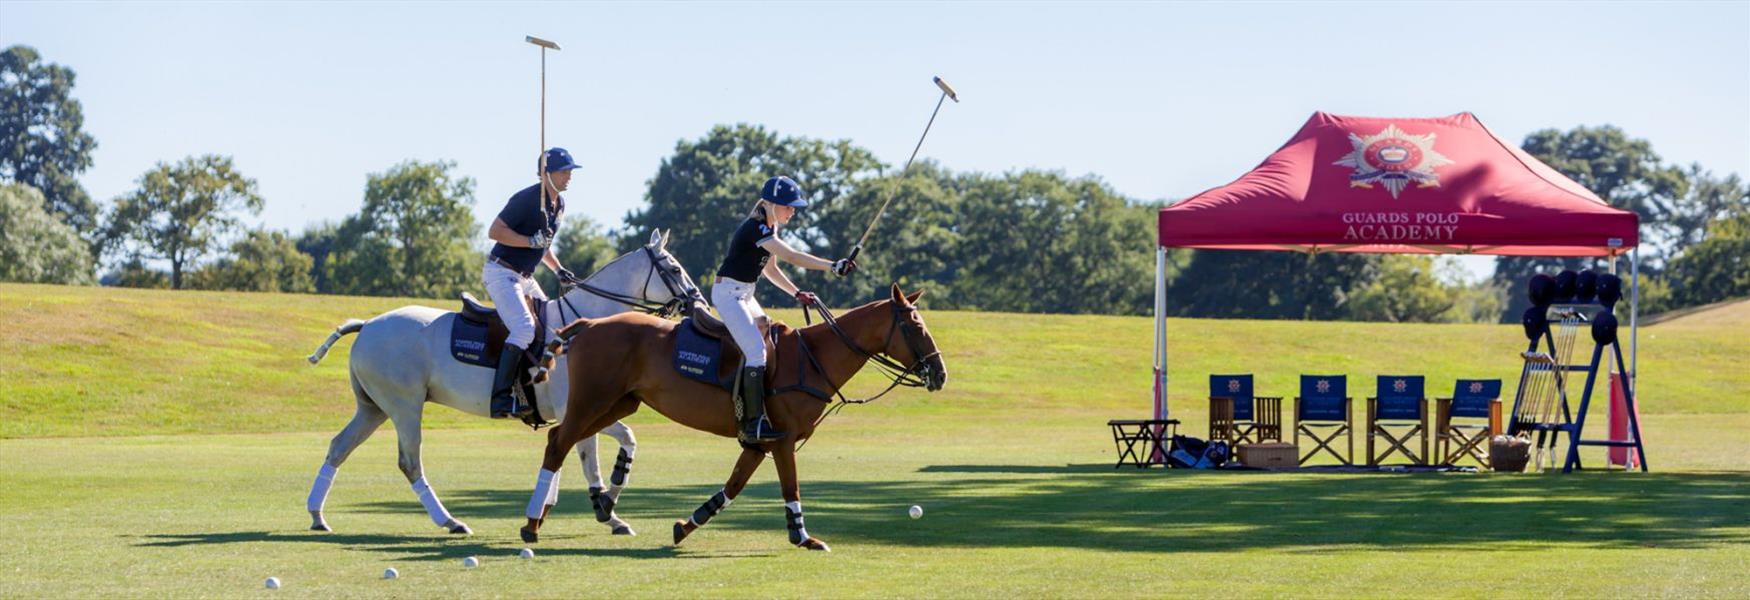 Learning to play Polo at Coworth Park